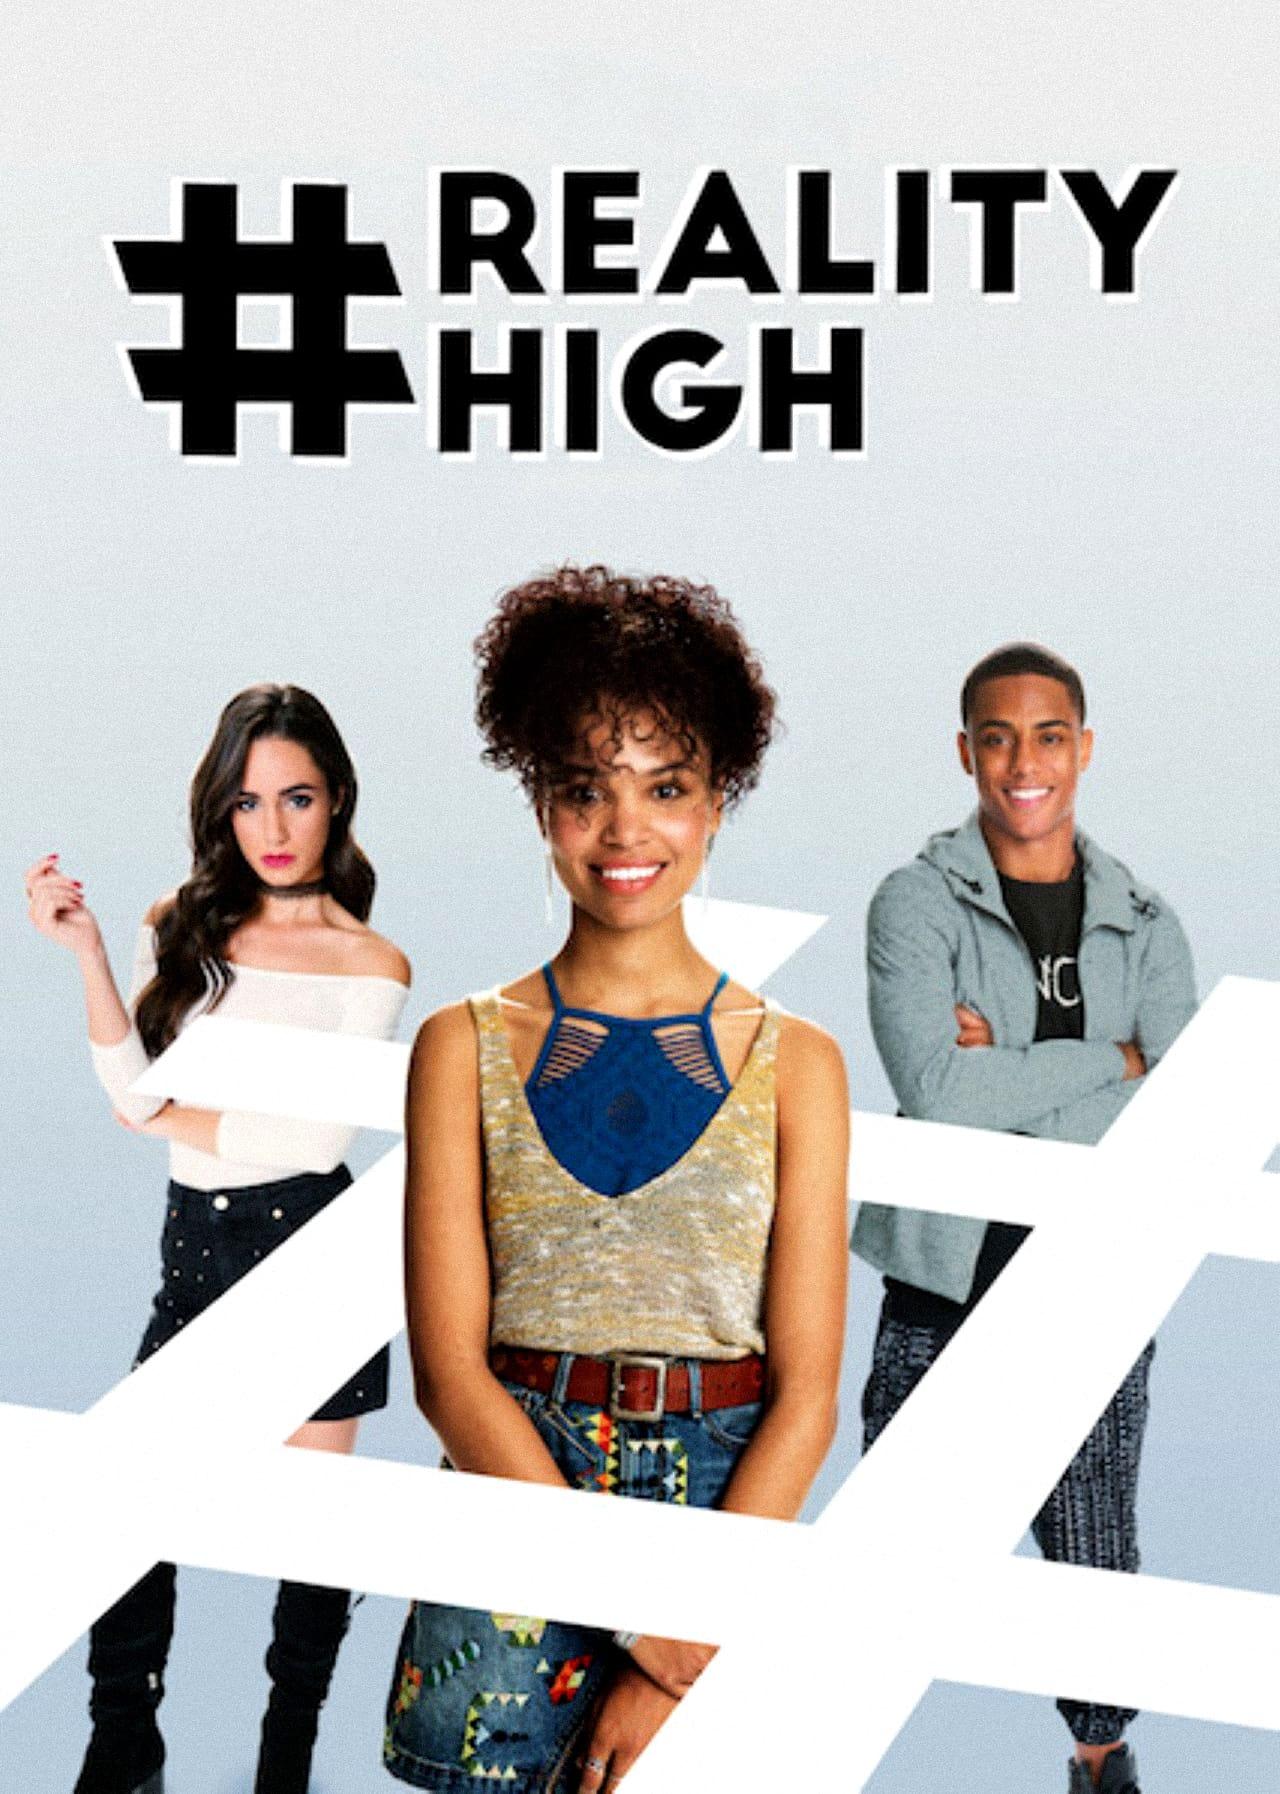 #realityhigh poster